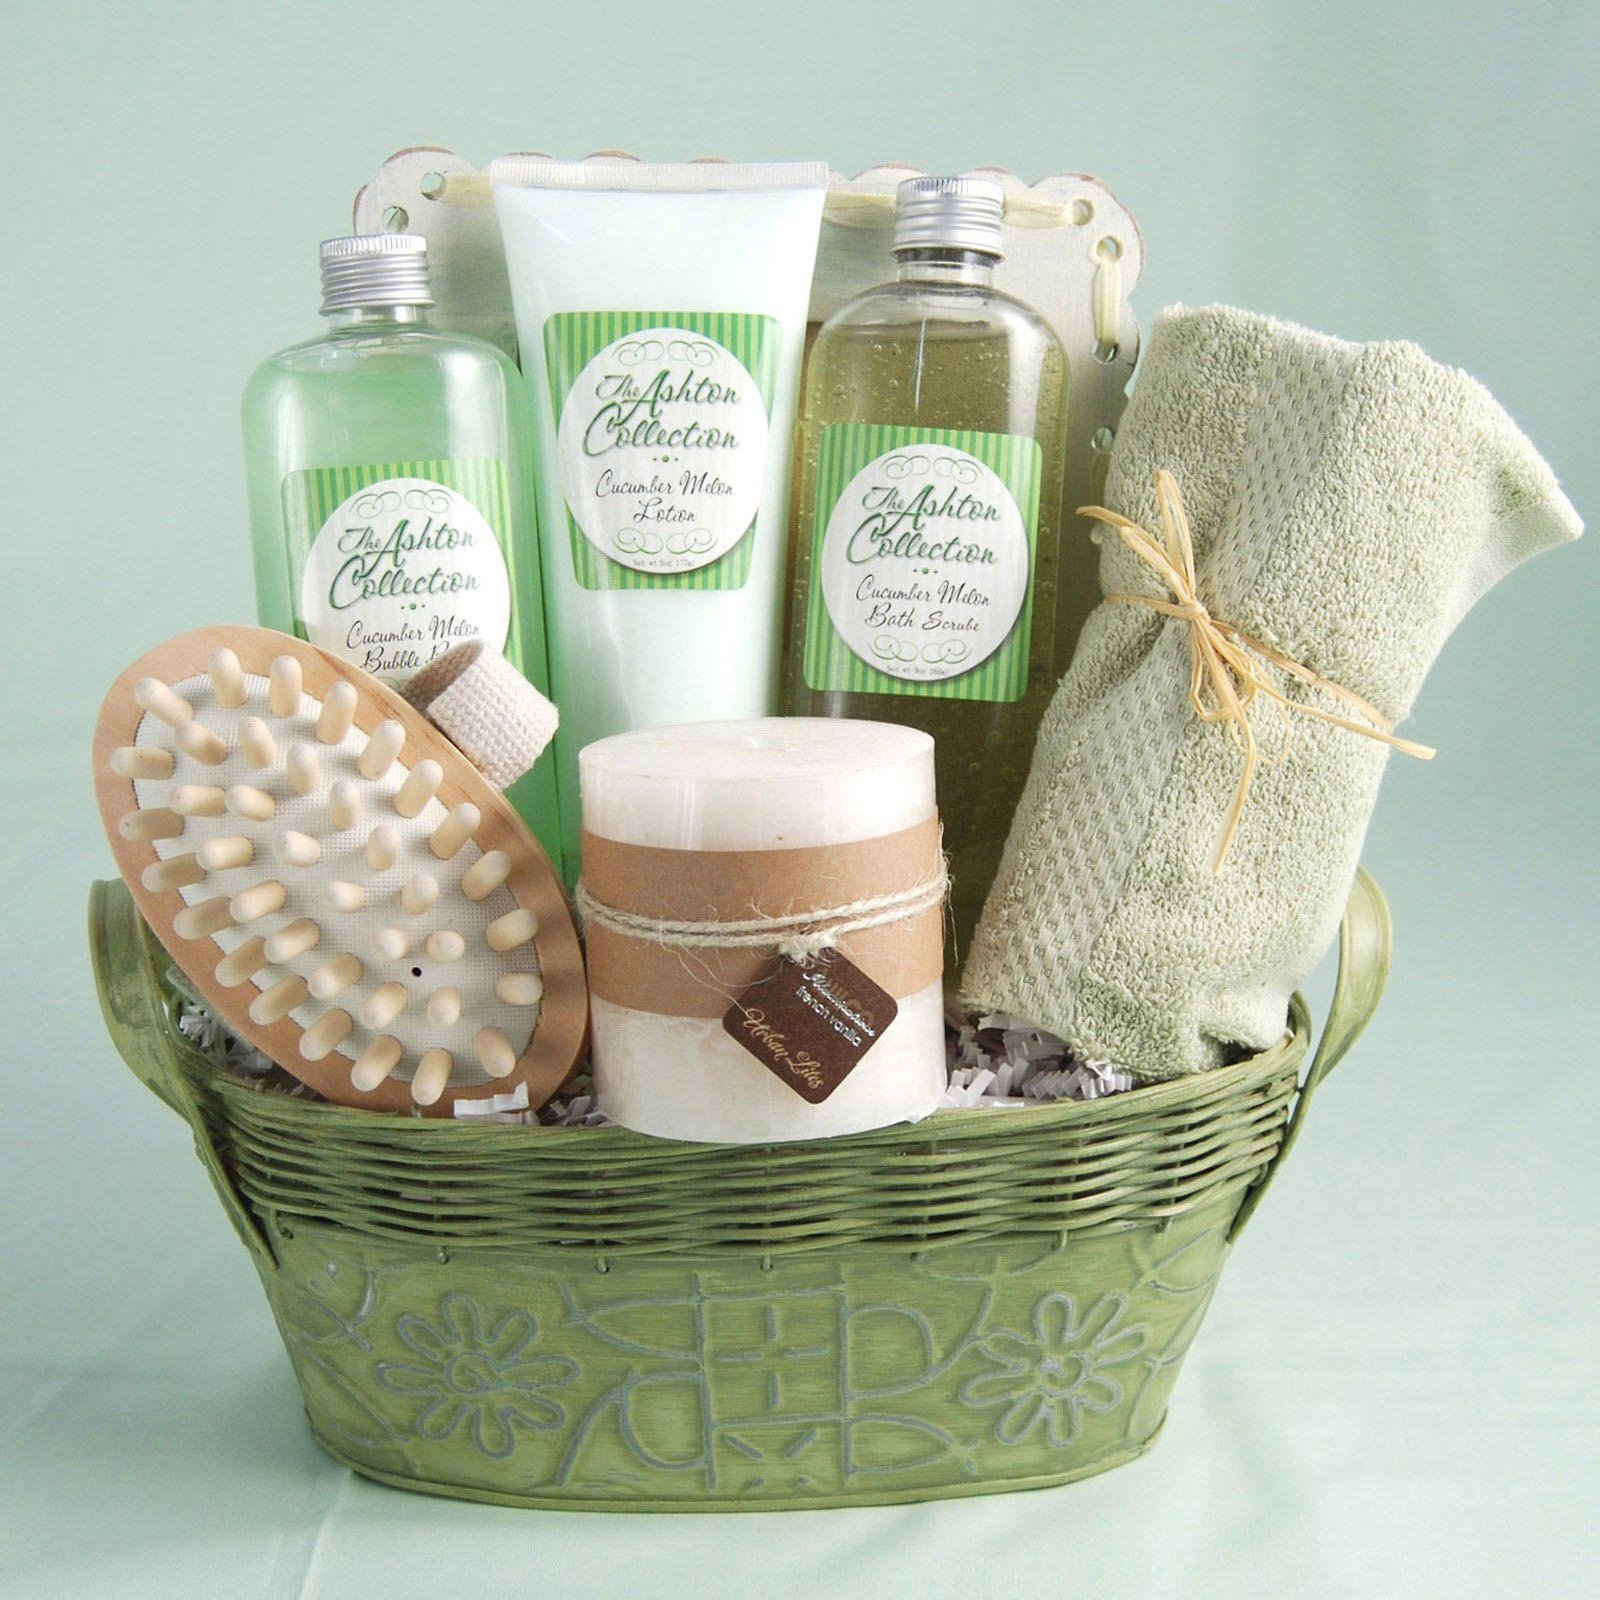 Spa Gift Baskets Ideas
 Spa Gift Baskets for Relaxing